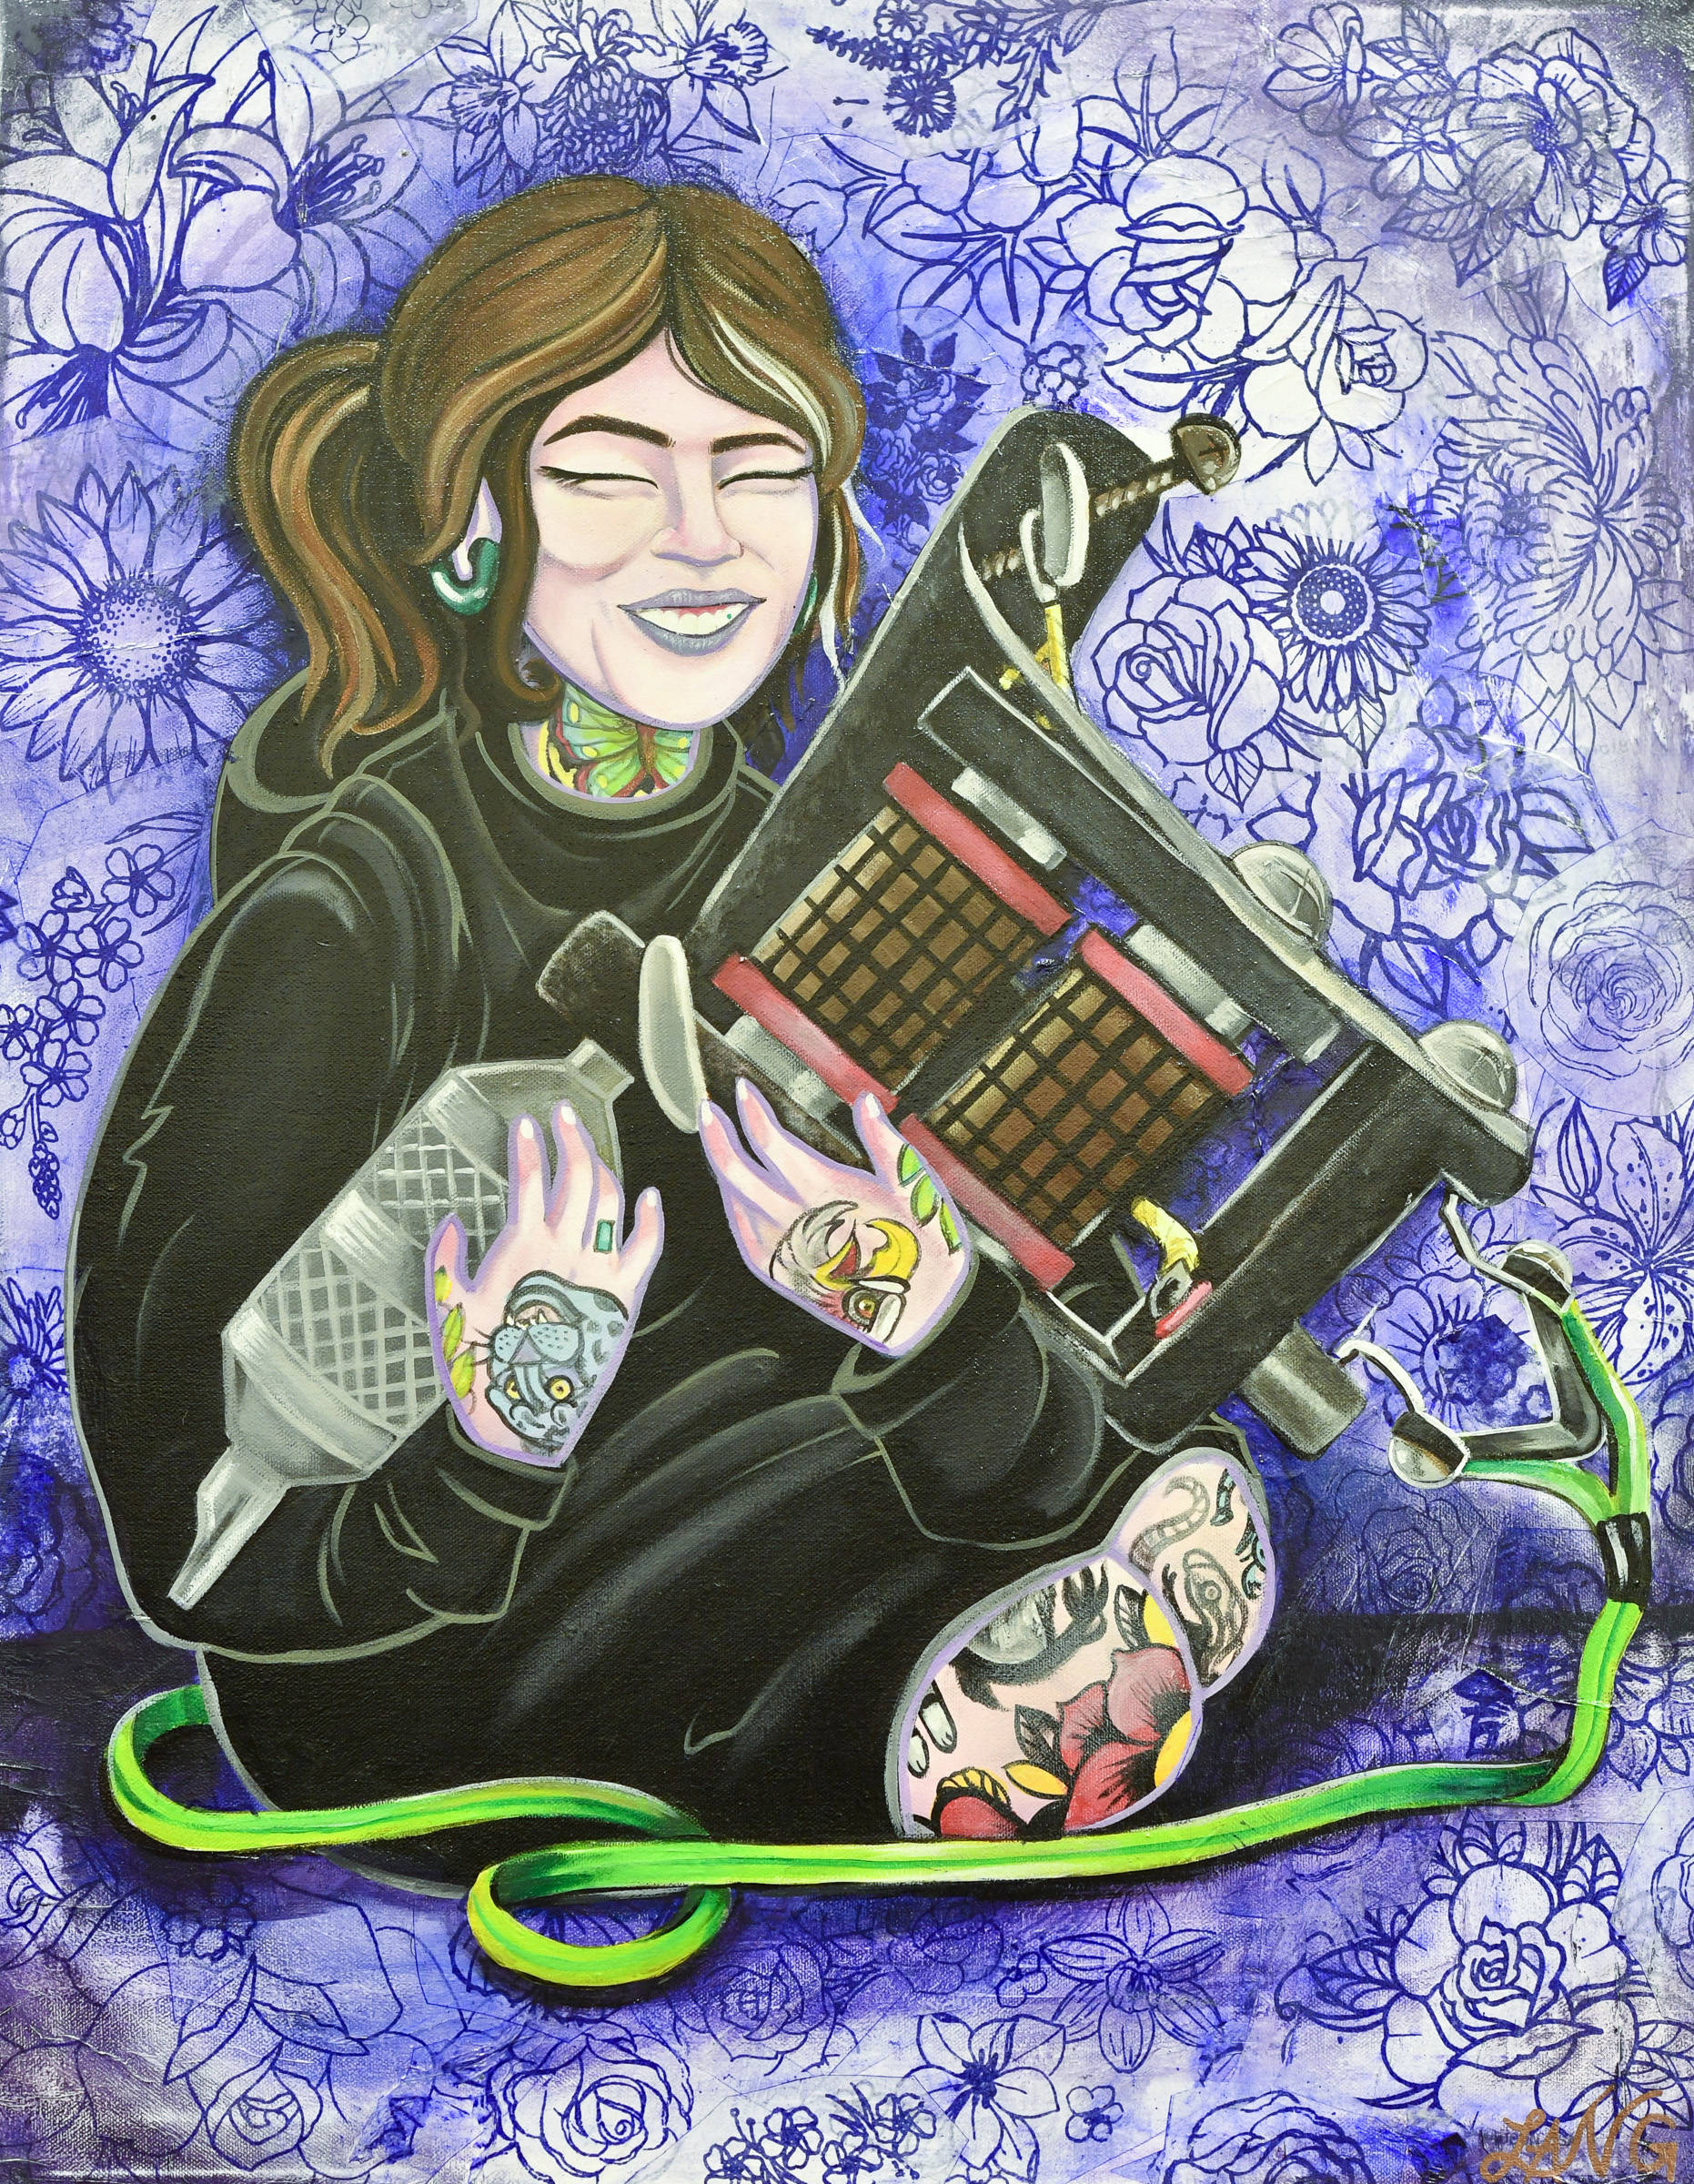 “Stencil Jockey” by Em Lang at the Davis Gallery in Centennial Hall on Friday, Feb. 22, 2019. The Persisters are an all-female art collective, and their newest show “Radical Self Love” features dozens of self-portraits and opens for First Friday. (Michael Penn | Juneau Empire)